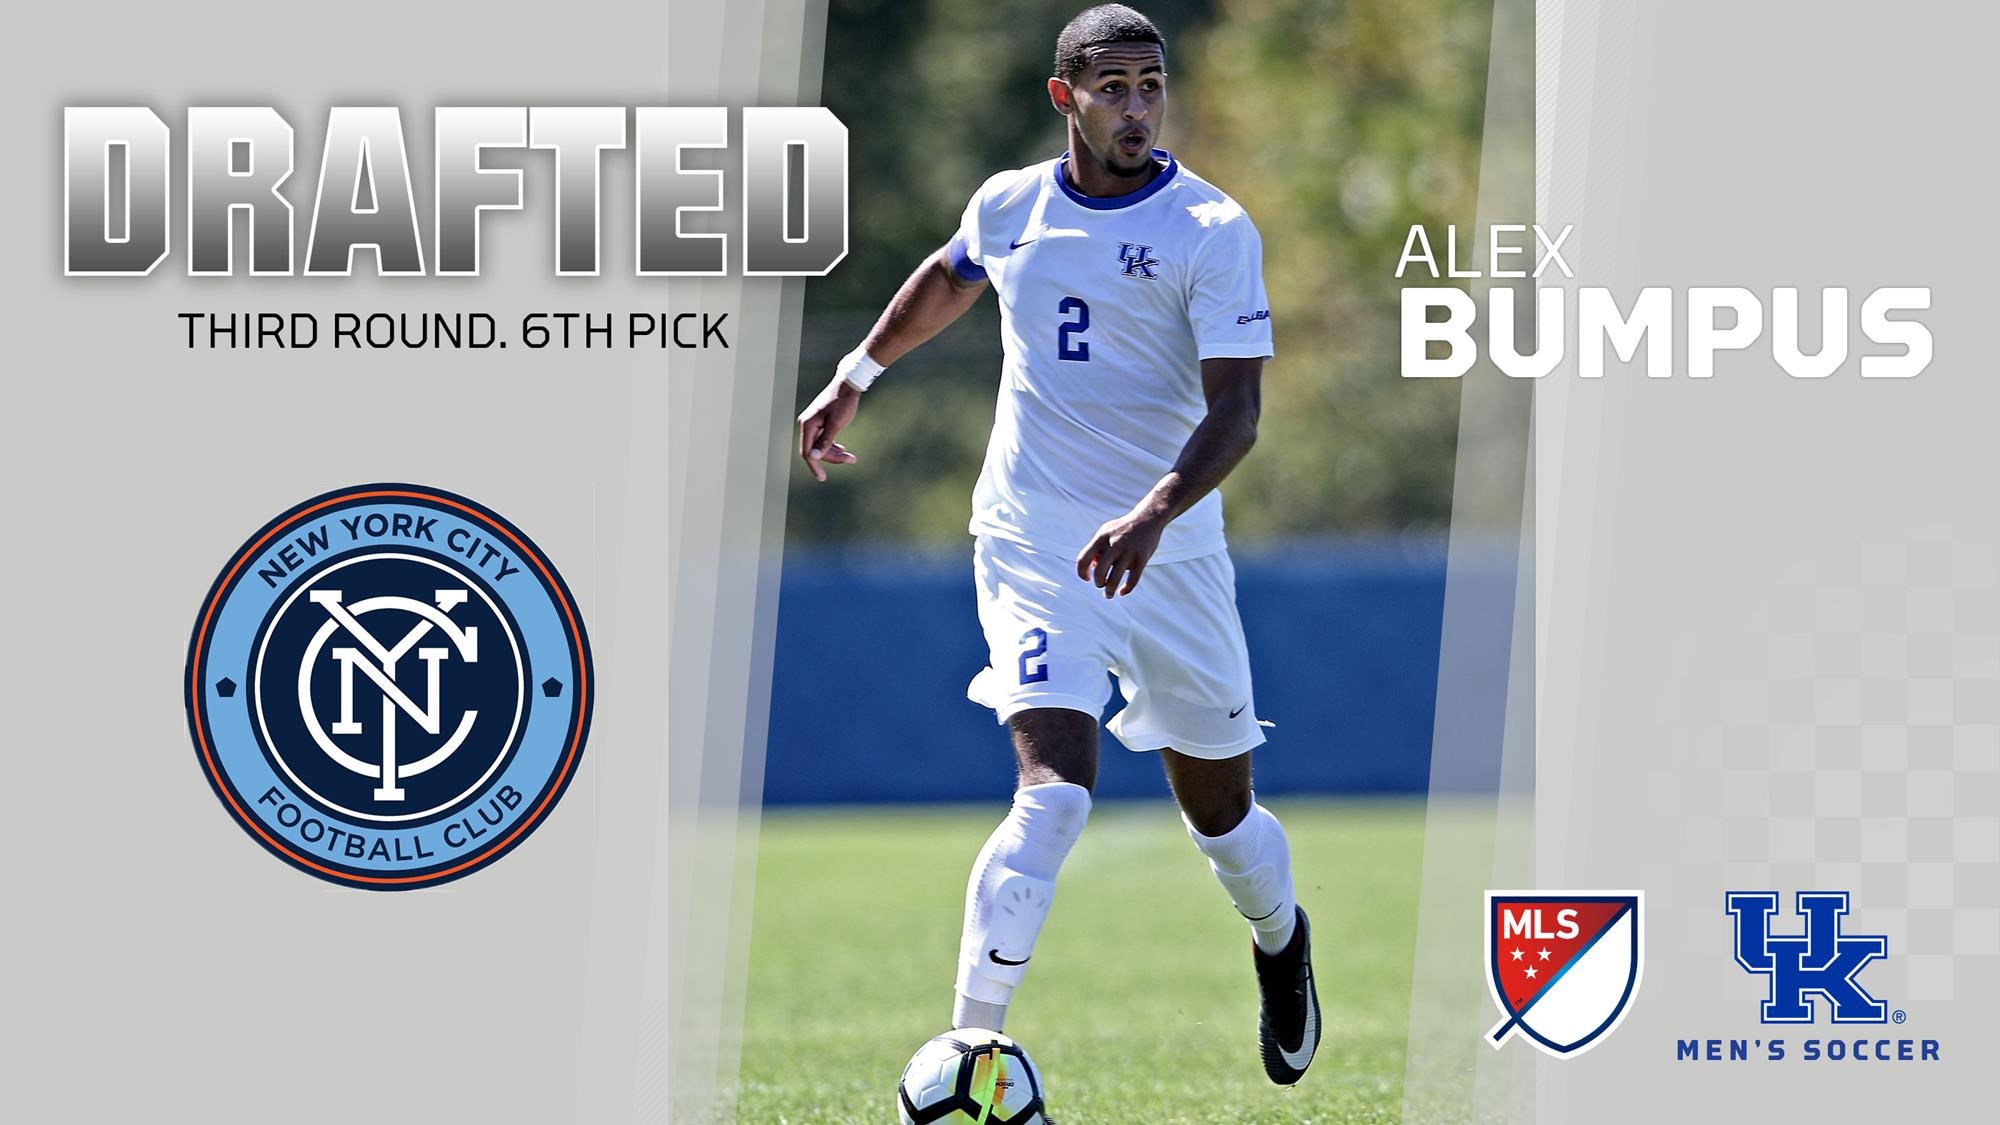 UK Men’s Soccer’s Alex Bumpus Drafted by NYCFC